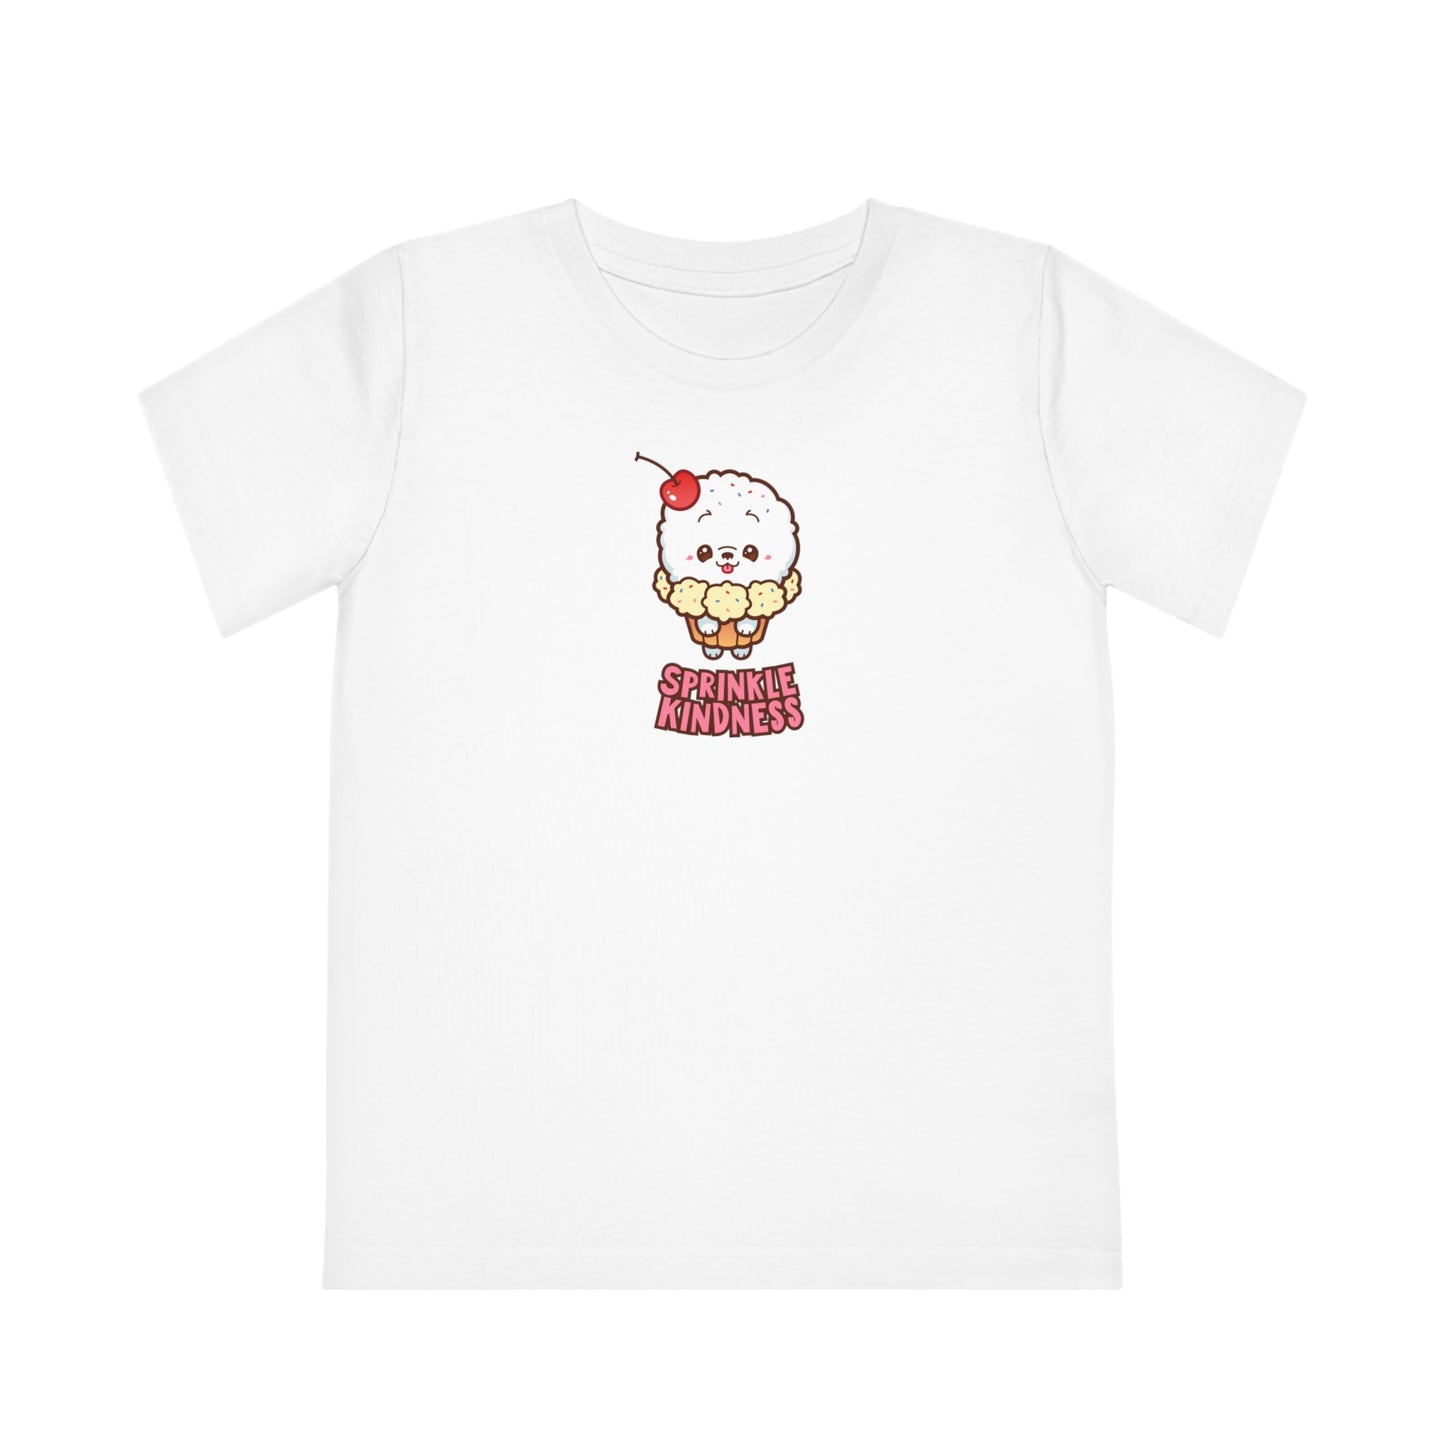 Anti-bullying Shirts for Kids, Children's Eco-friendly Cute T-shirt, Kids Natural Kindness T-shirt, Toddler & Youth Tee, Kids Sprinkle Kindness Tee